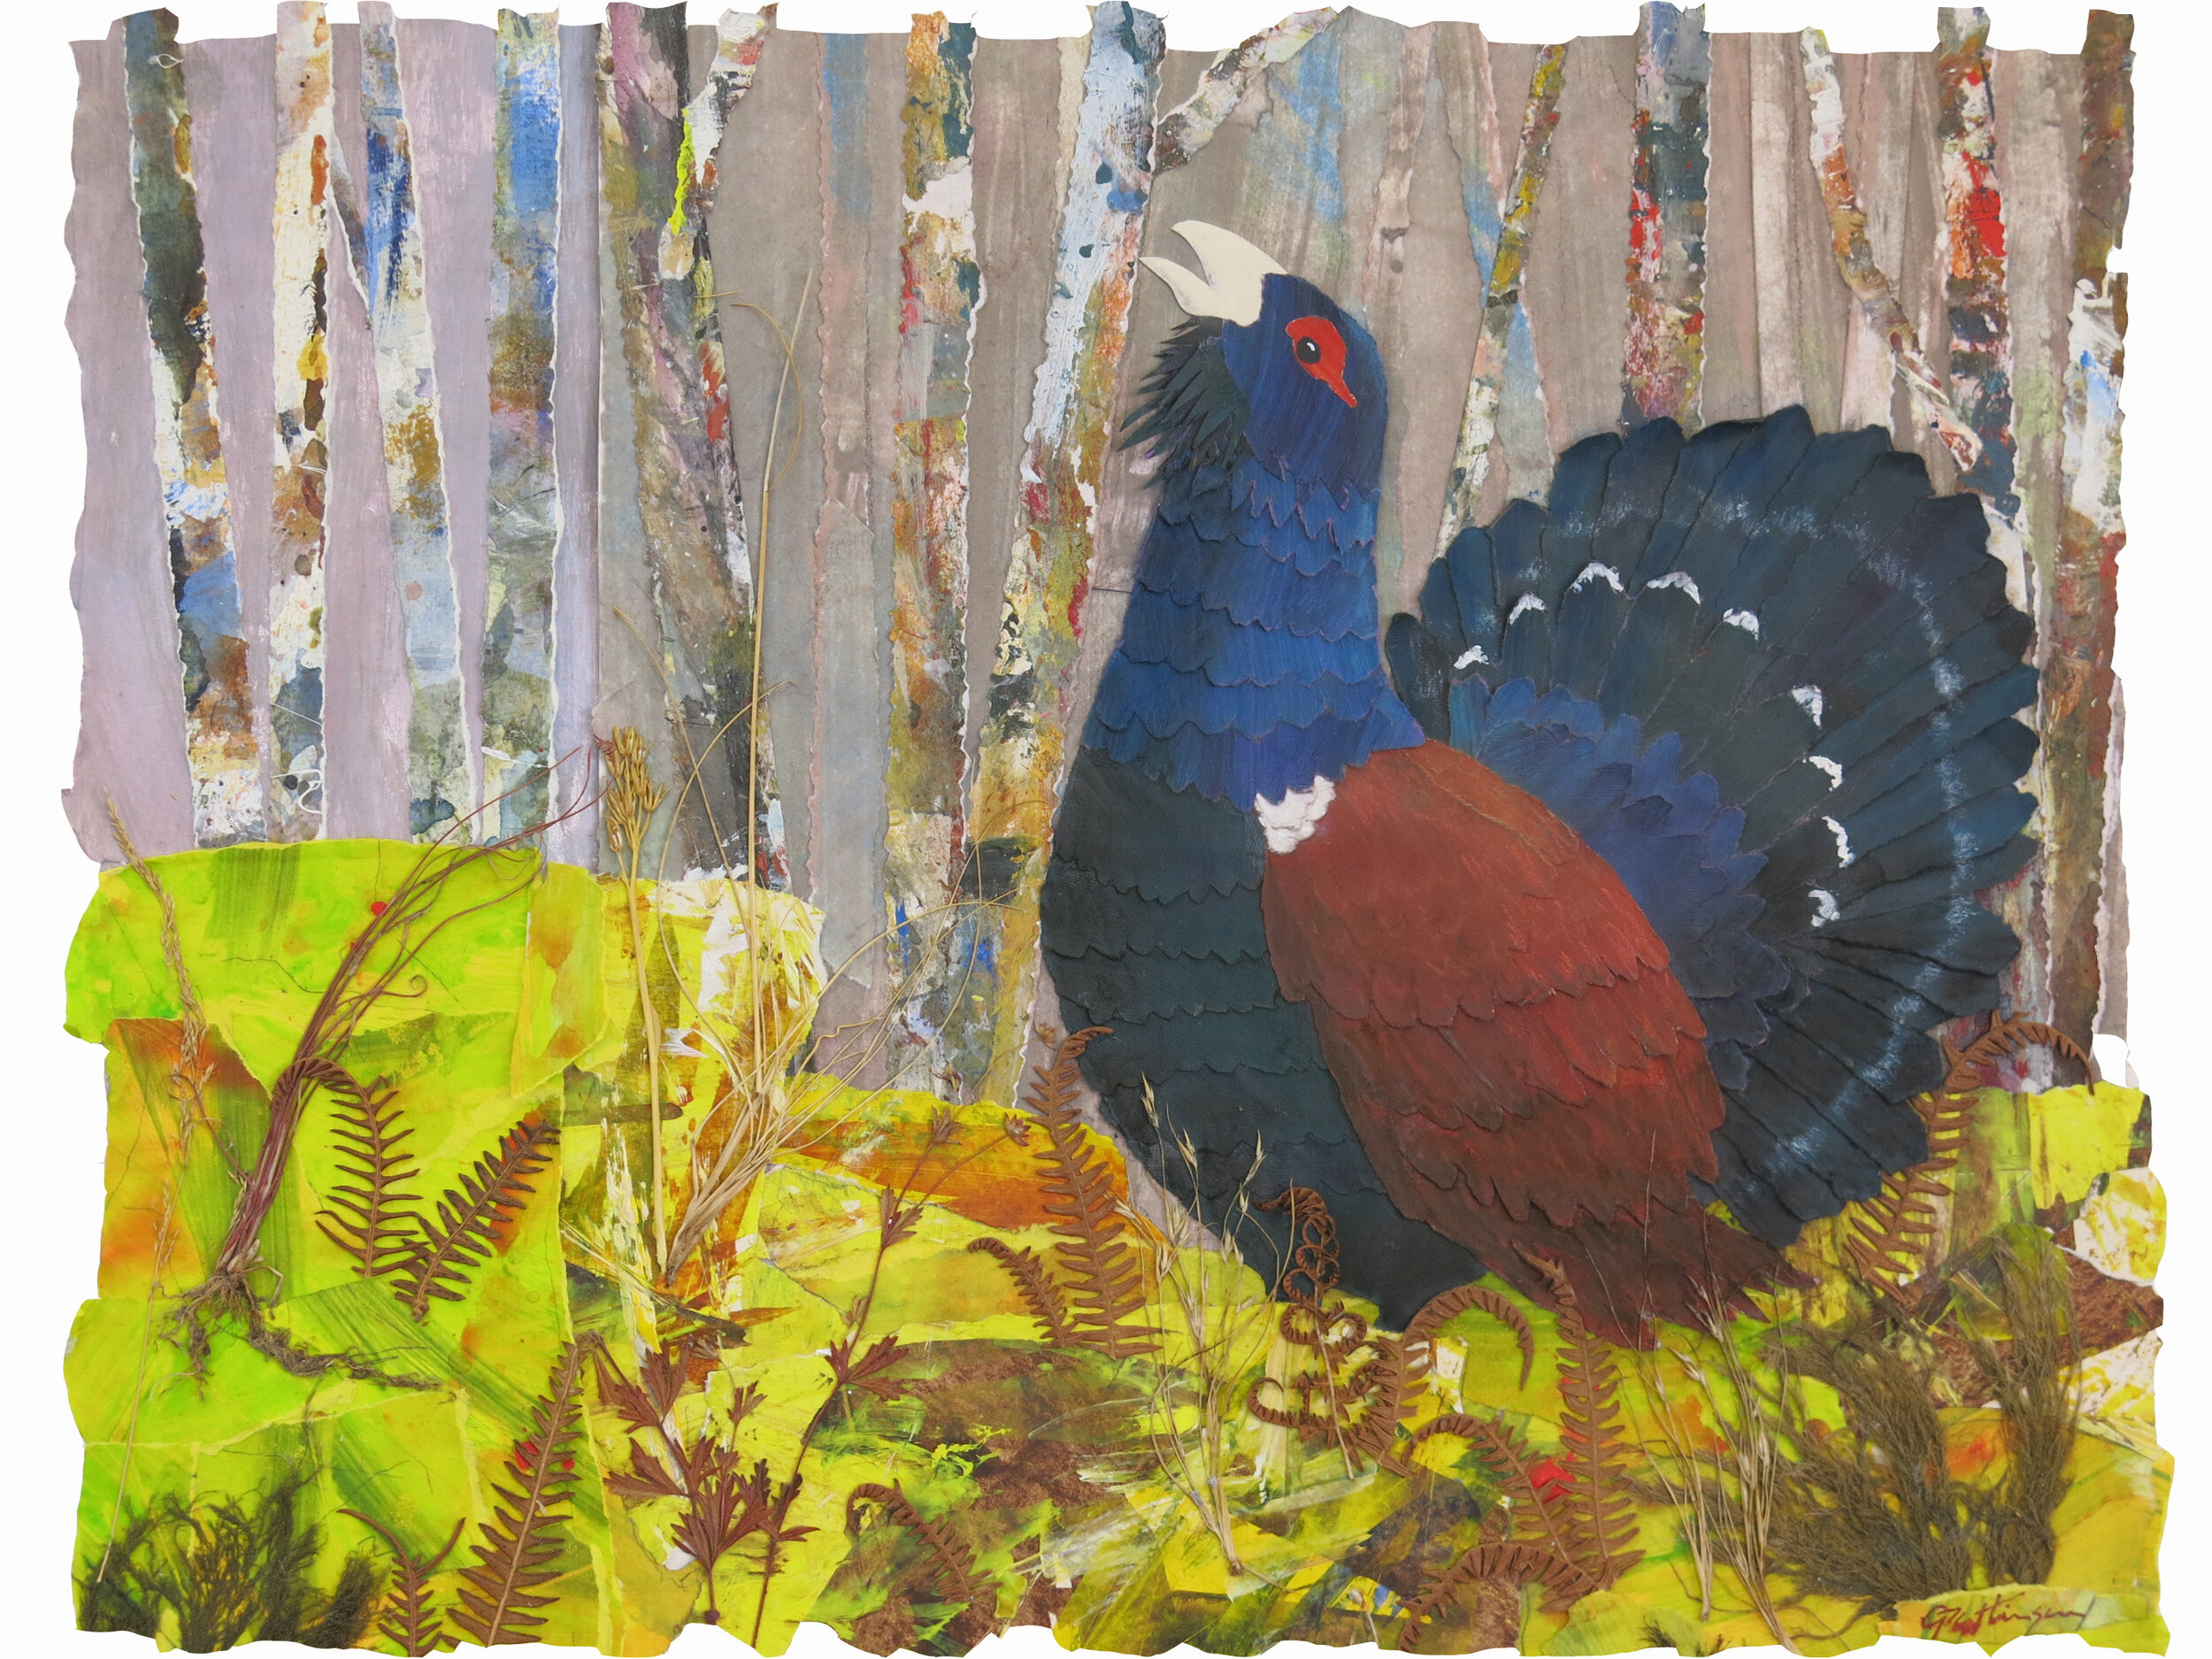 2c Capercaillie - 1 of 6 place mat and coaster designs for endangered species series.-1.jpg